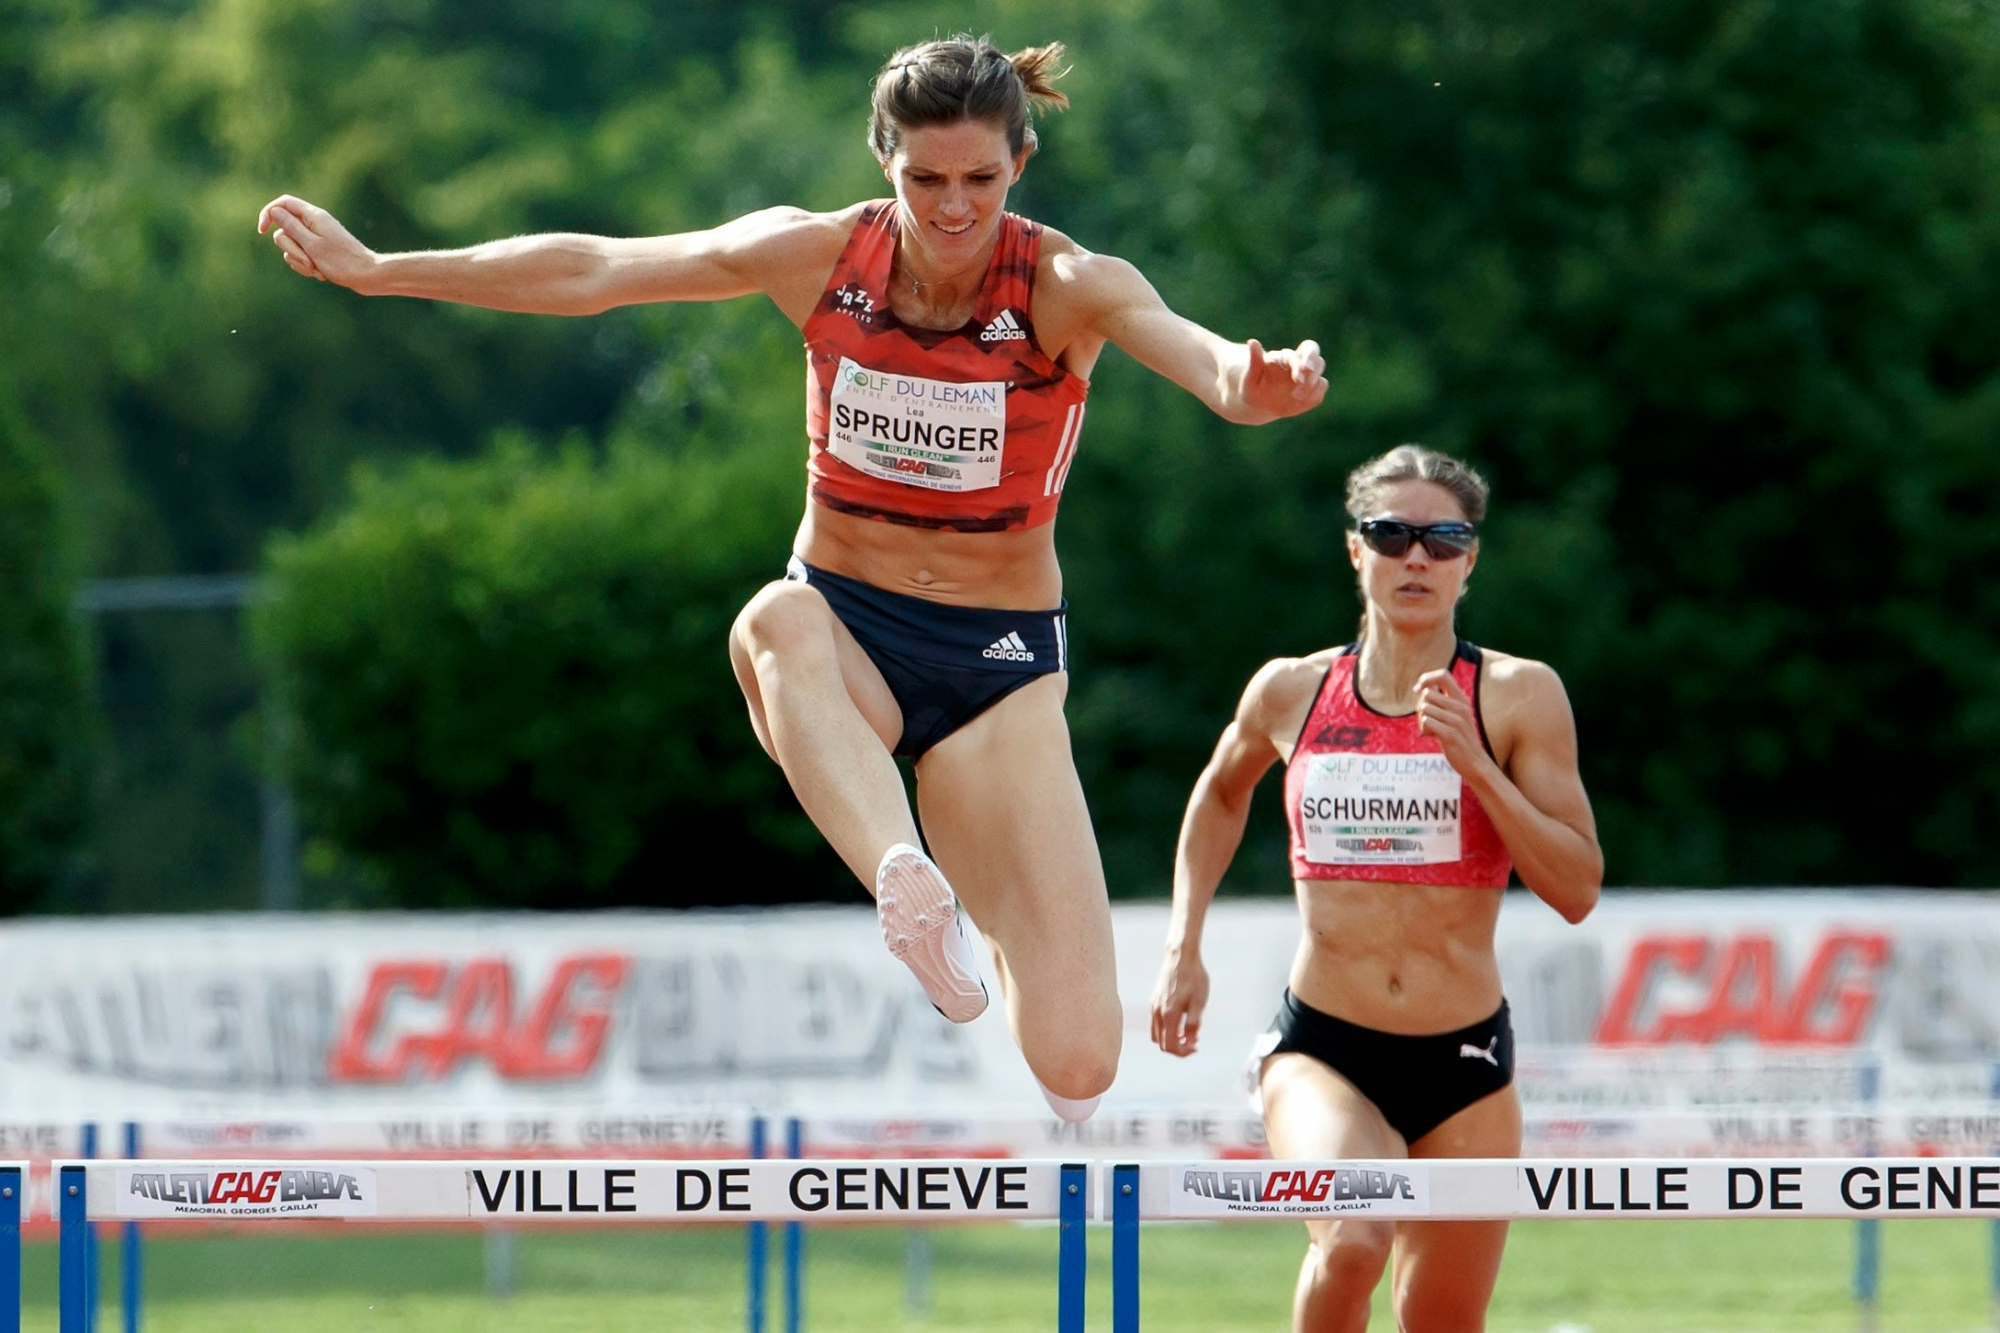 Lea Sprunger, left, of Switzerland, and Robine Schuermann, right, of Switzerland, compete at the women's 400m Hurdles, during the AtletiCAGeneve athletics meeting - Swiss meeting, in Geneva, Switzerland, Saturday, June 9, 2018. (KEYSTONE/Salvatore Di Nolfi) SWITZERLAND ATHLETICS ATHLETICA MEETING